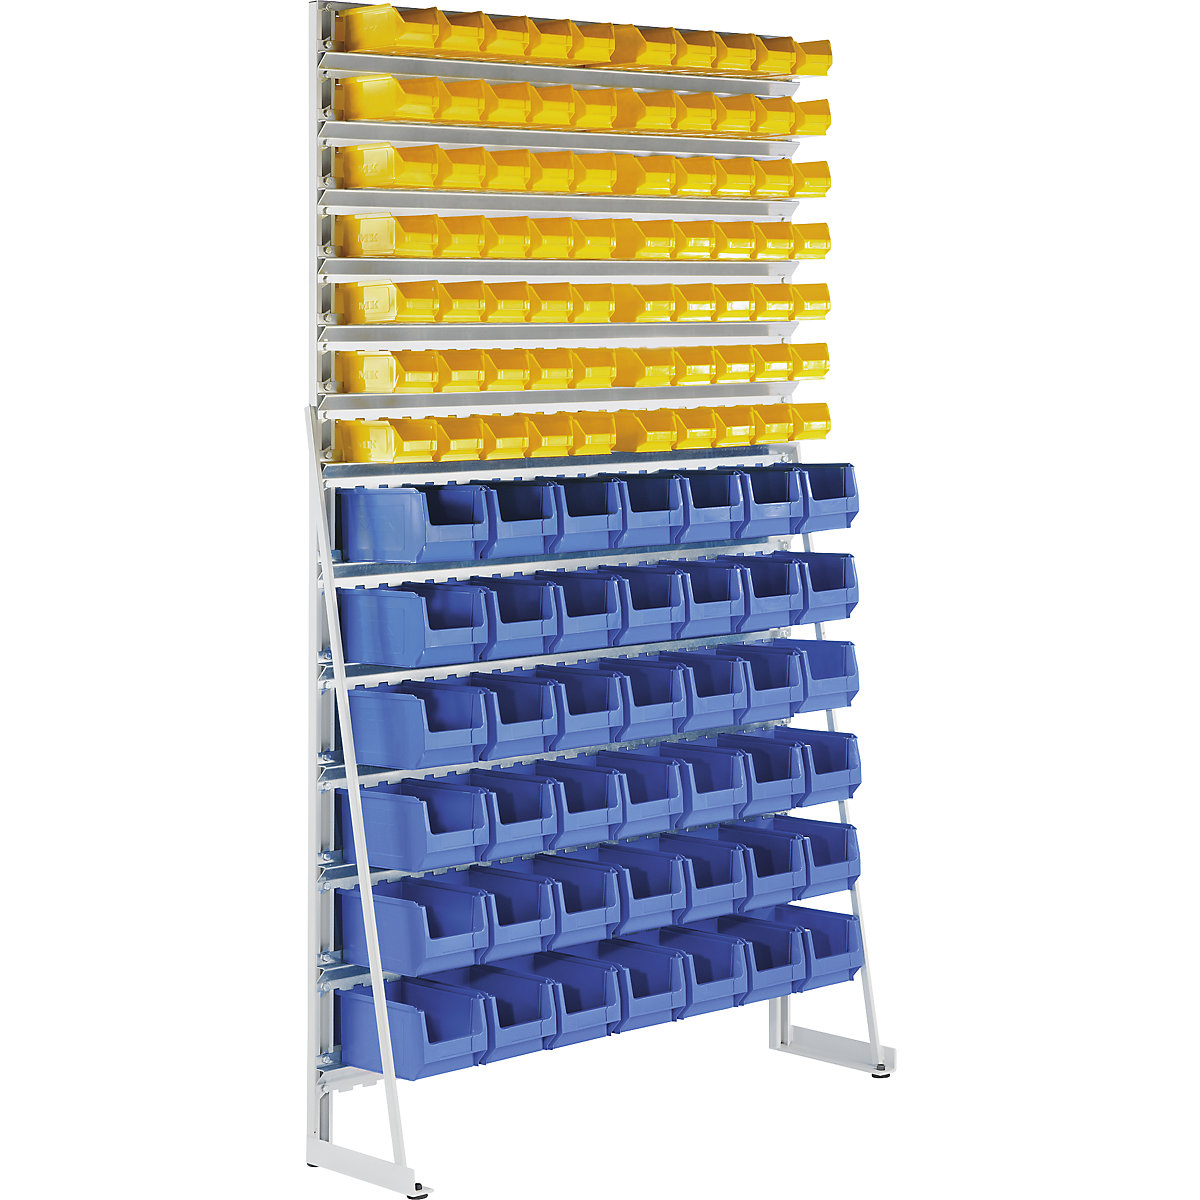 Free-standing small parts shelf unit with open fronted storage bins - eurokraft pro